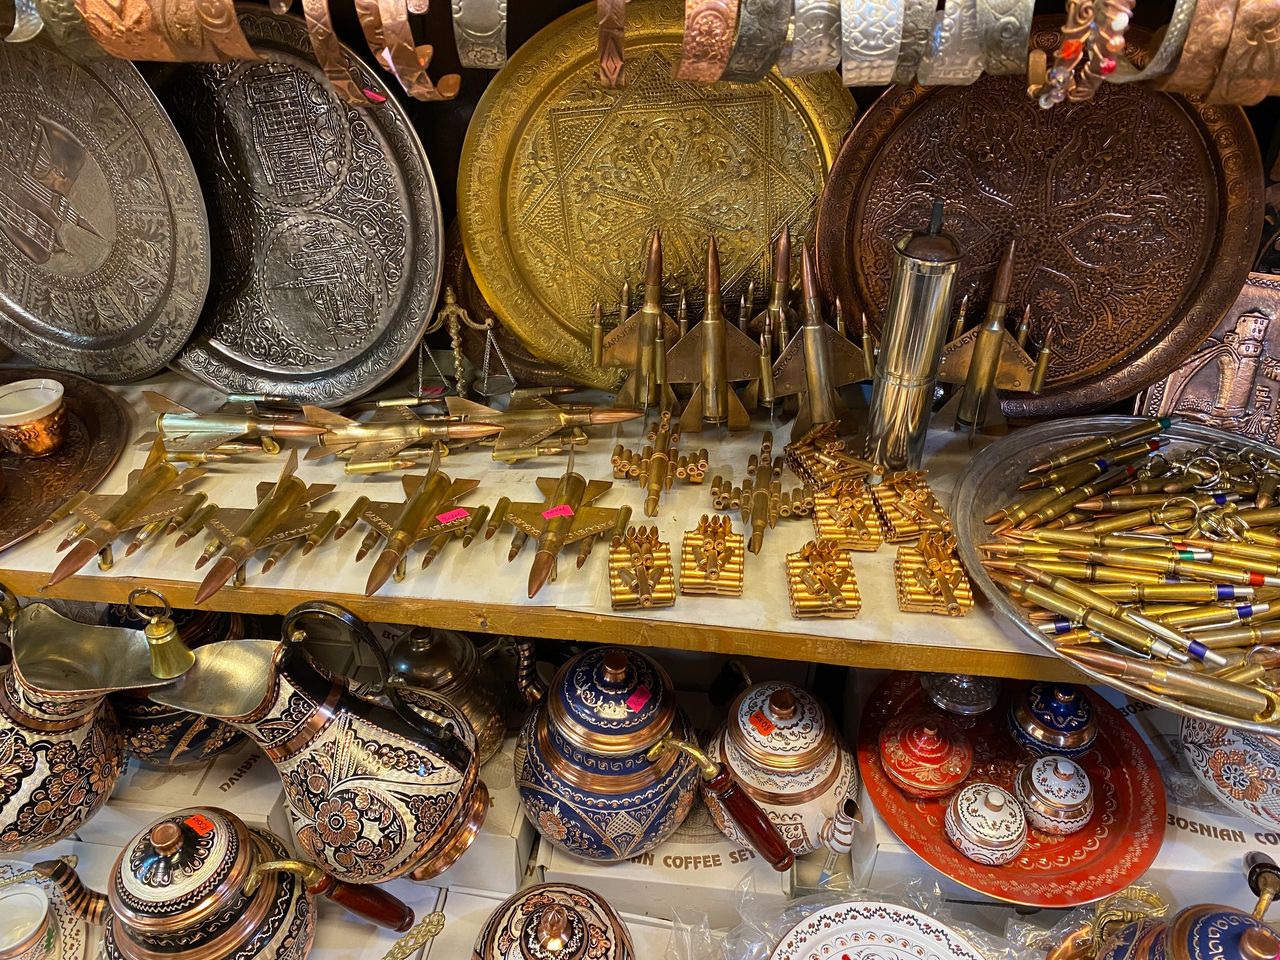 Lots of souvenir trinkets created from ammunition and artillery shells